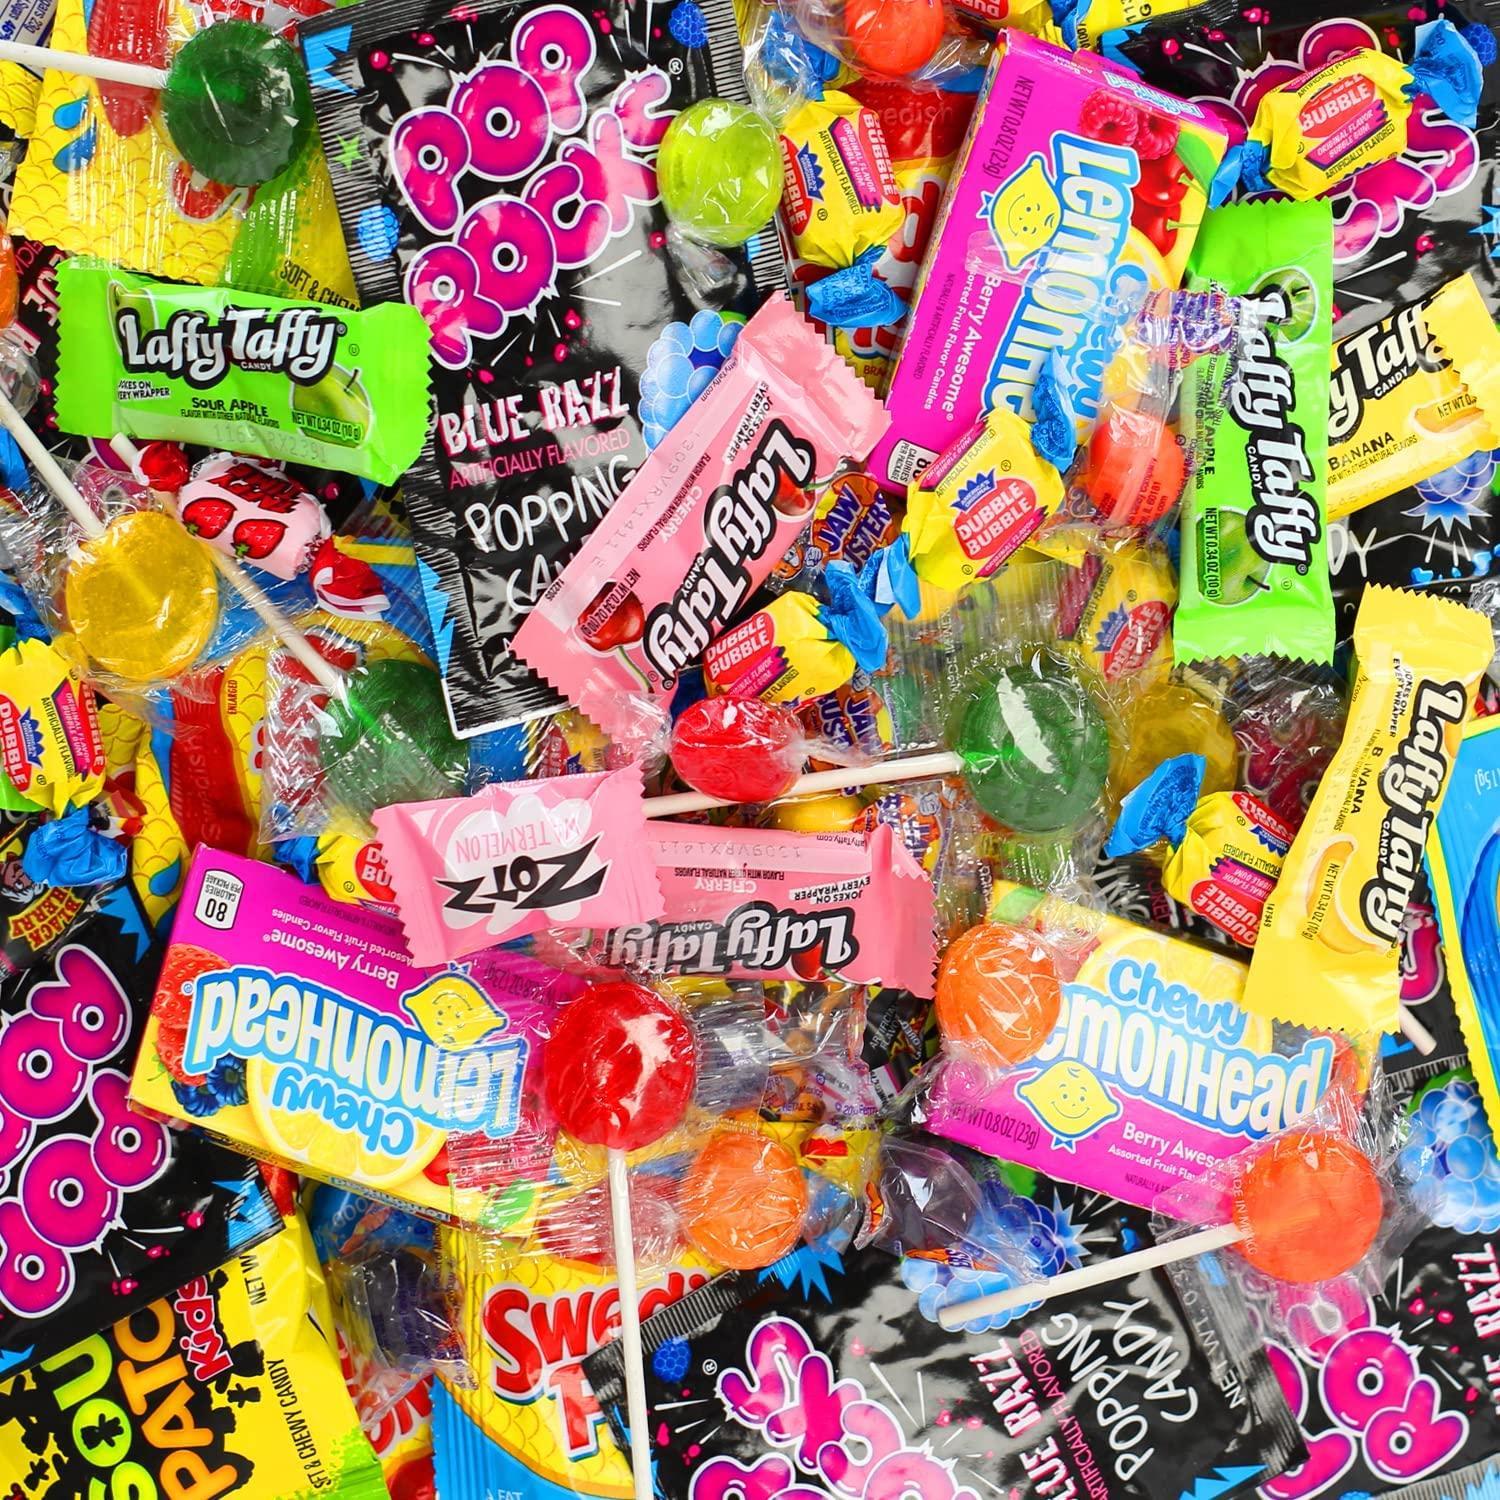 Candy Mix Assorted - Candies Bulk - 4 Pounds - Pinata Stuffers - Fun Size - Individually Wrapped - Party Candies for Kids, Kids Unisex, Size: 4 lbs